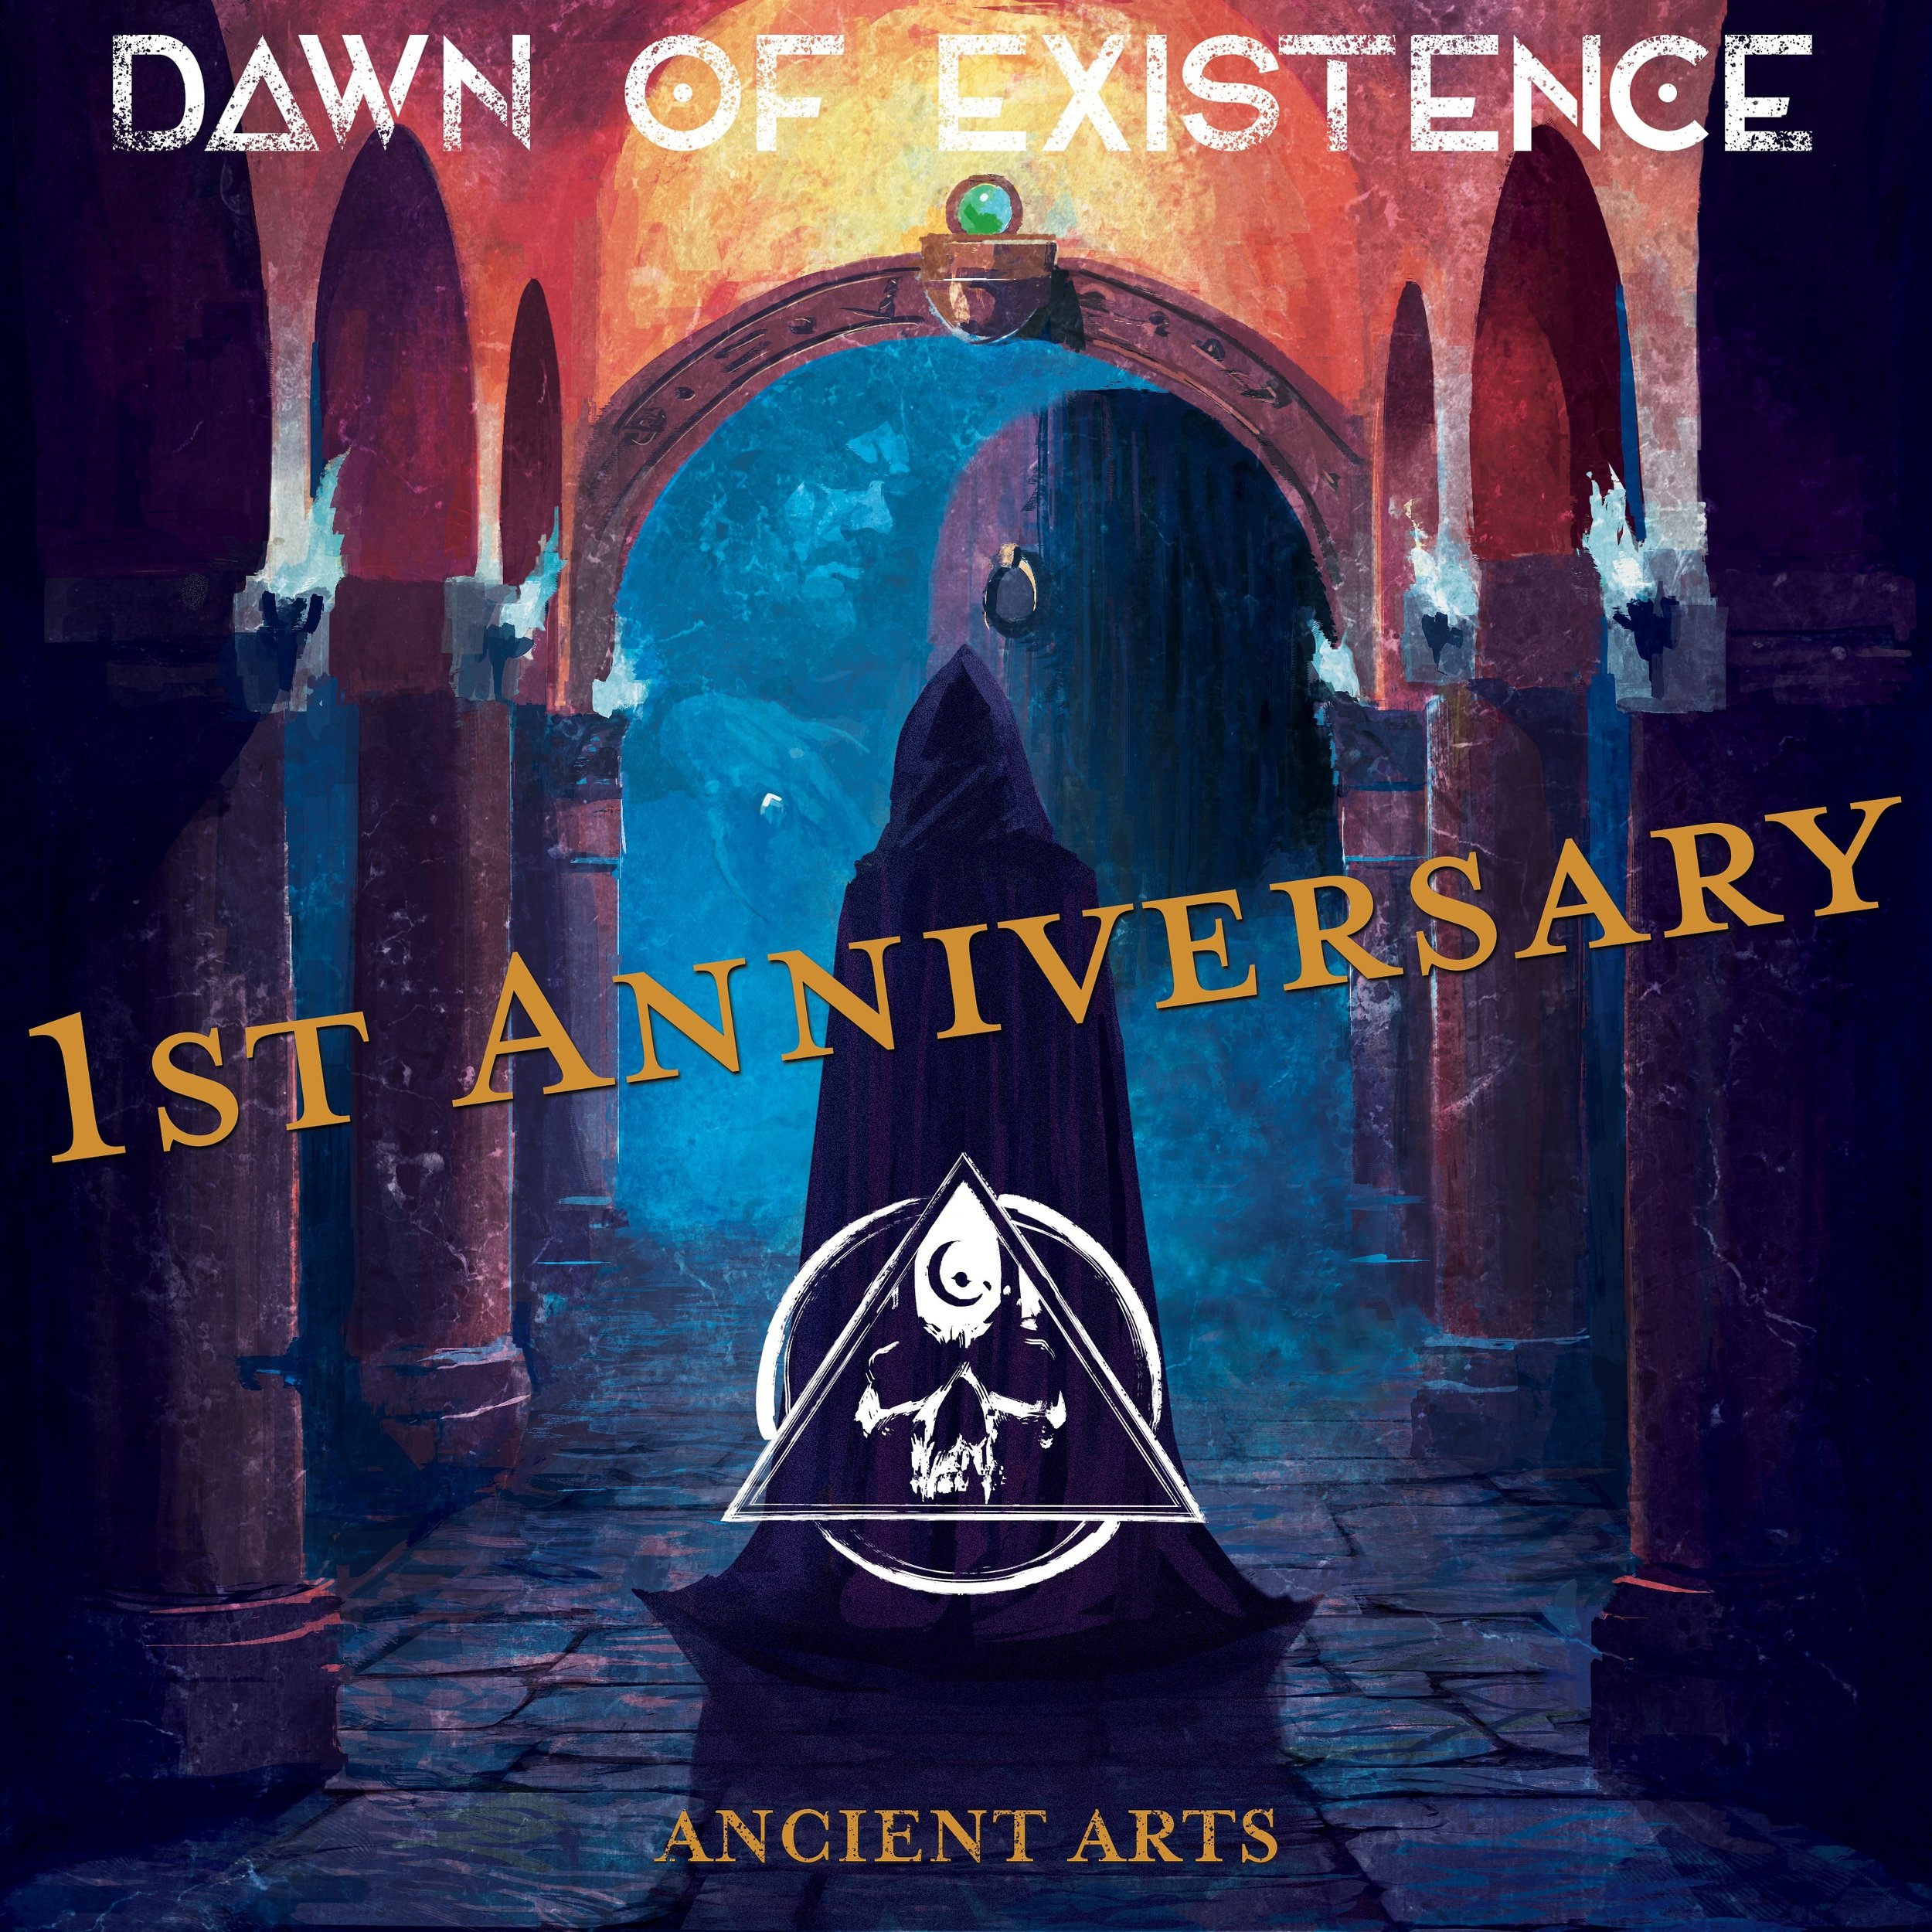 May 5, 2023 was the day we unleashed our debut album, Ancient Arts.

Today we&rsquo;re celebrating its first anniversary! Play it loud on your favorite streaming platform including Bandcamp, Spotify, Apple Music, and more! Thanks to everyone for the 